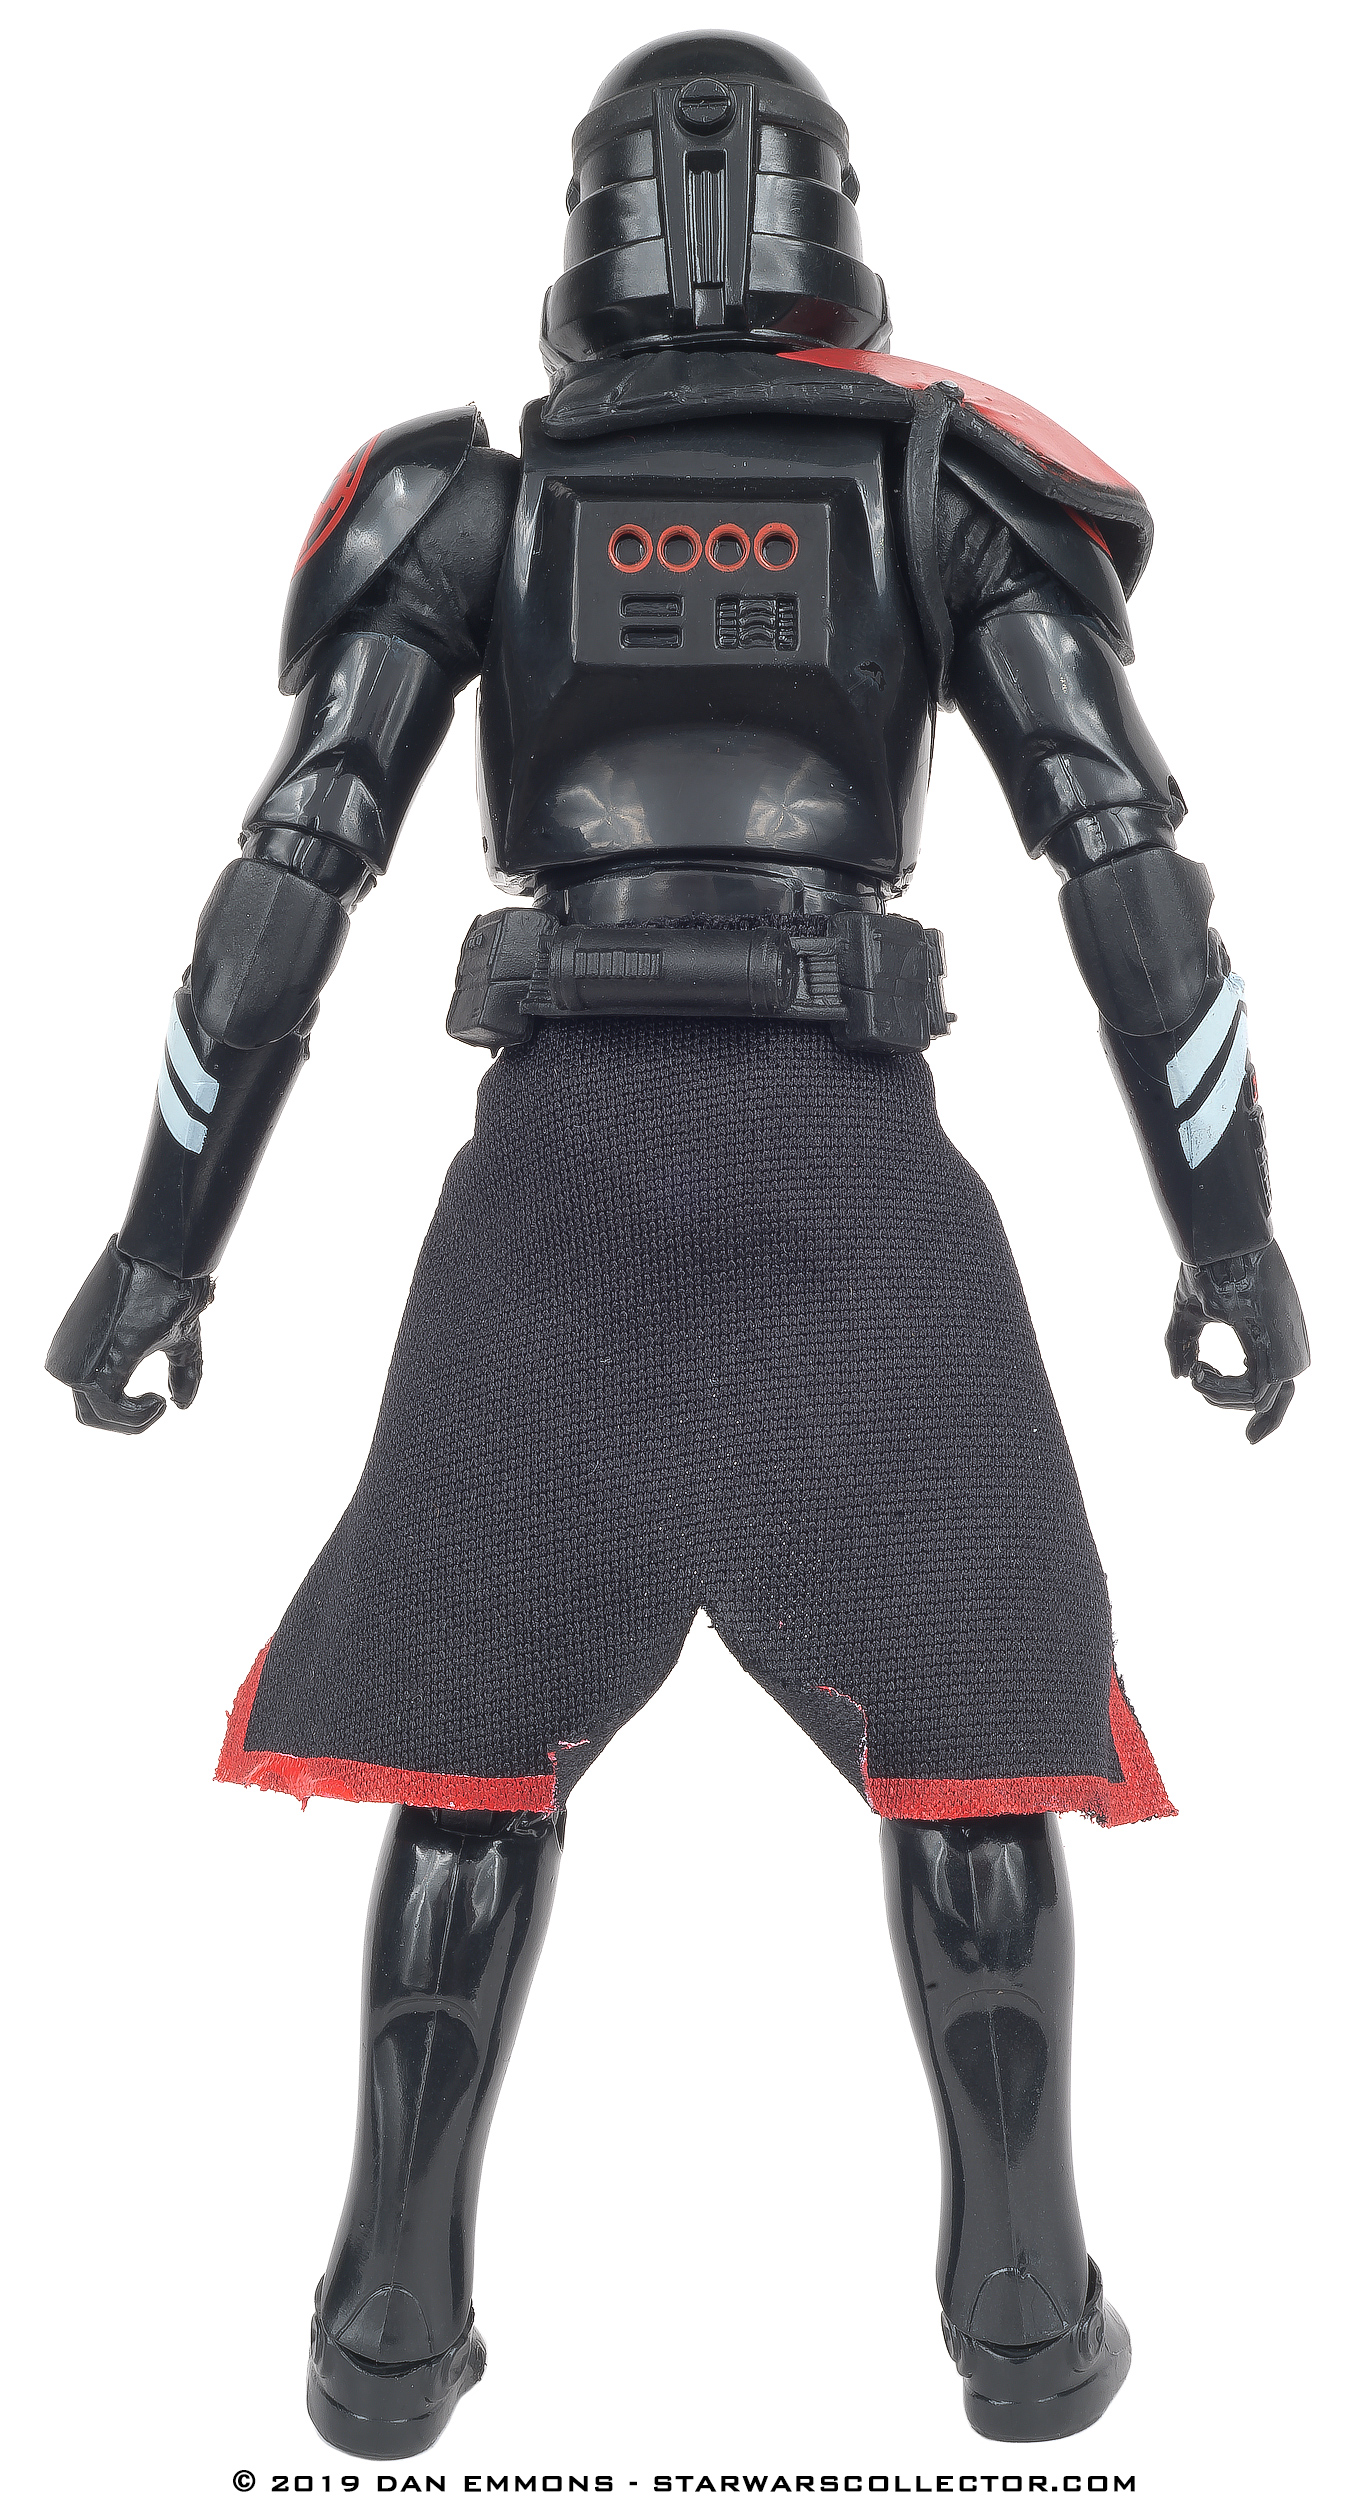 The Black Series 6-Inch Game Stop Exclusive Gaming Greats: Purge Stormtrooper